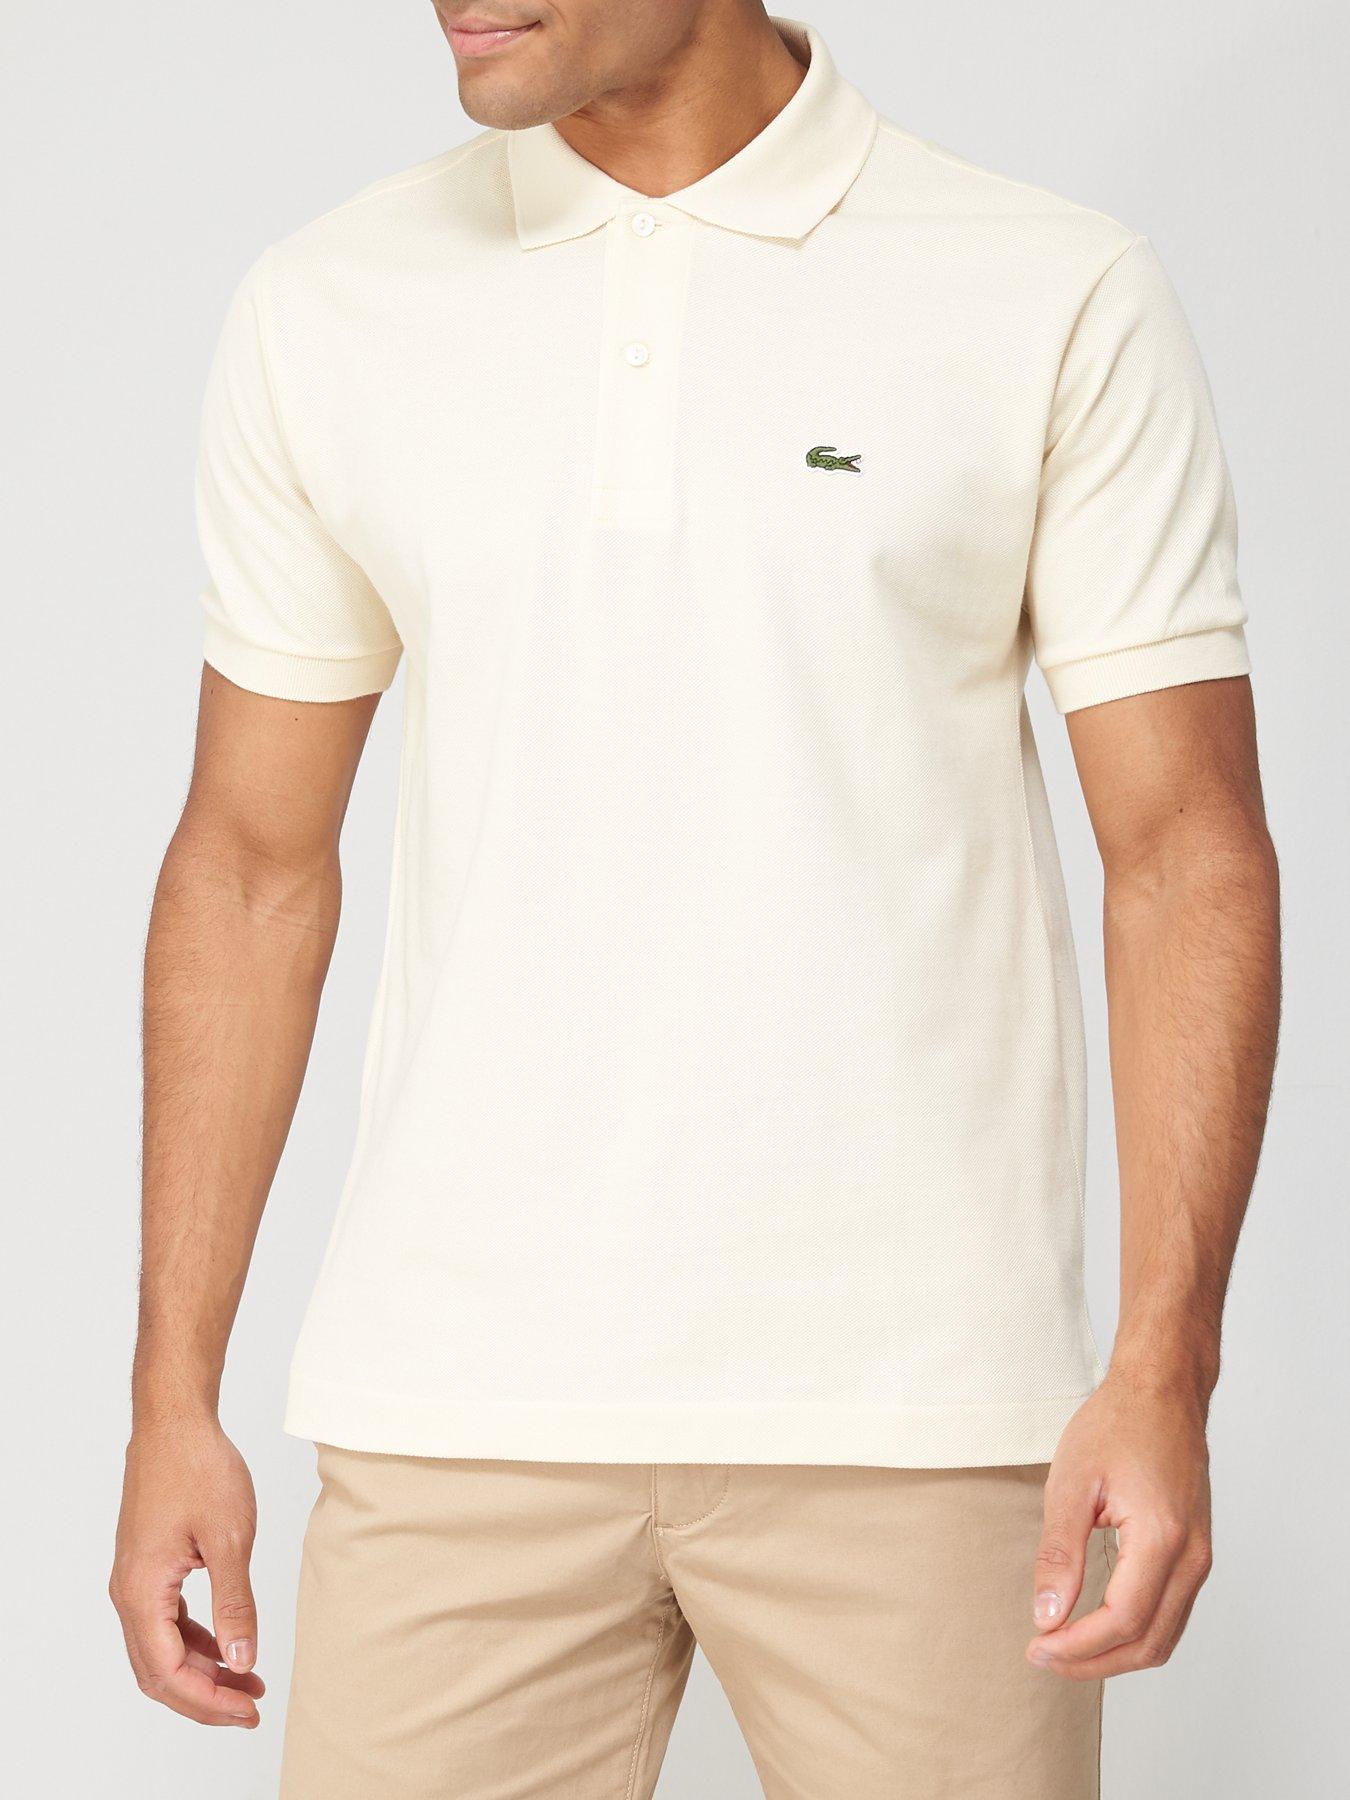 very lacoste t shirt